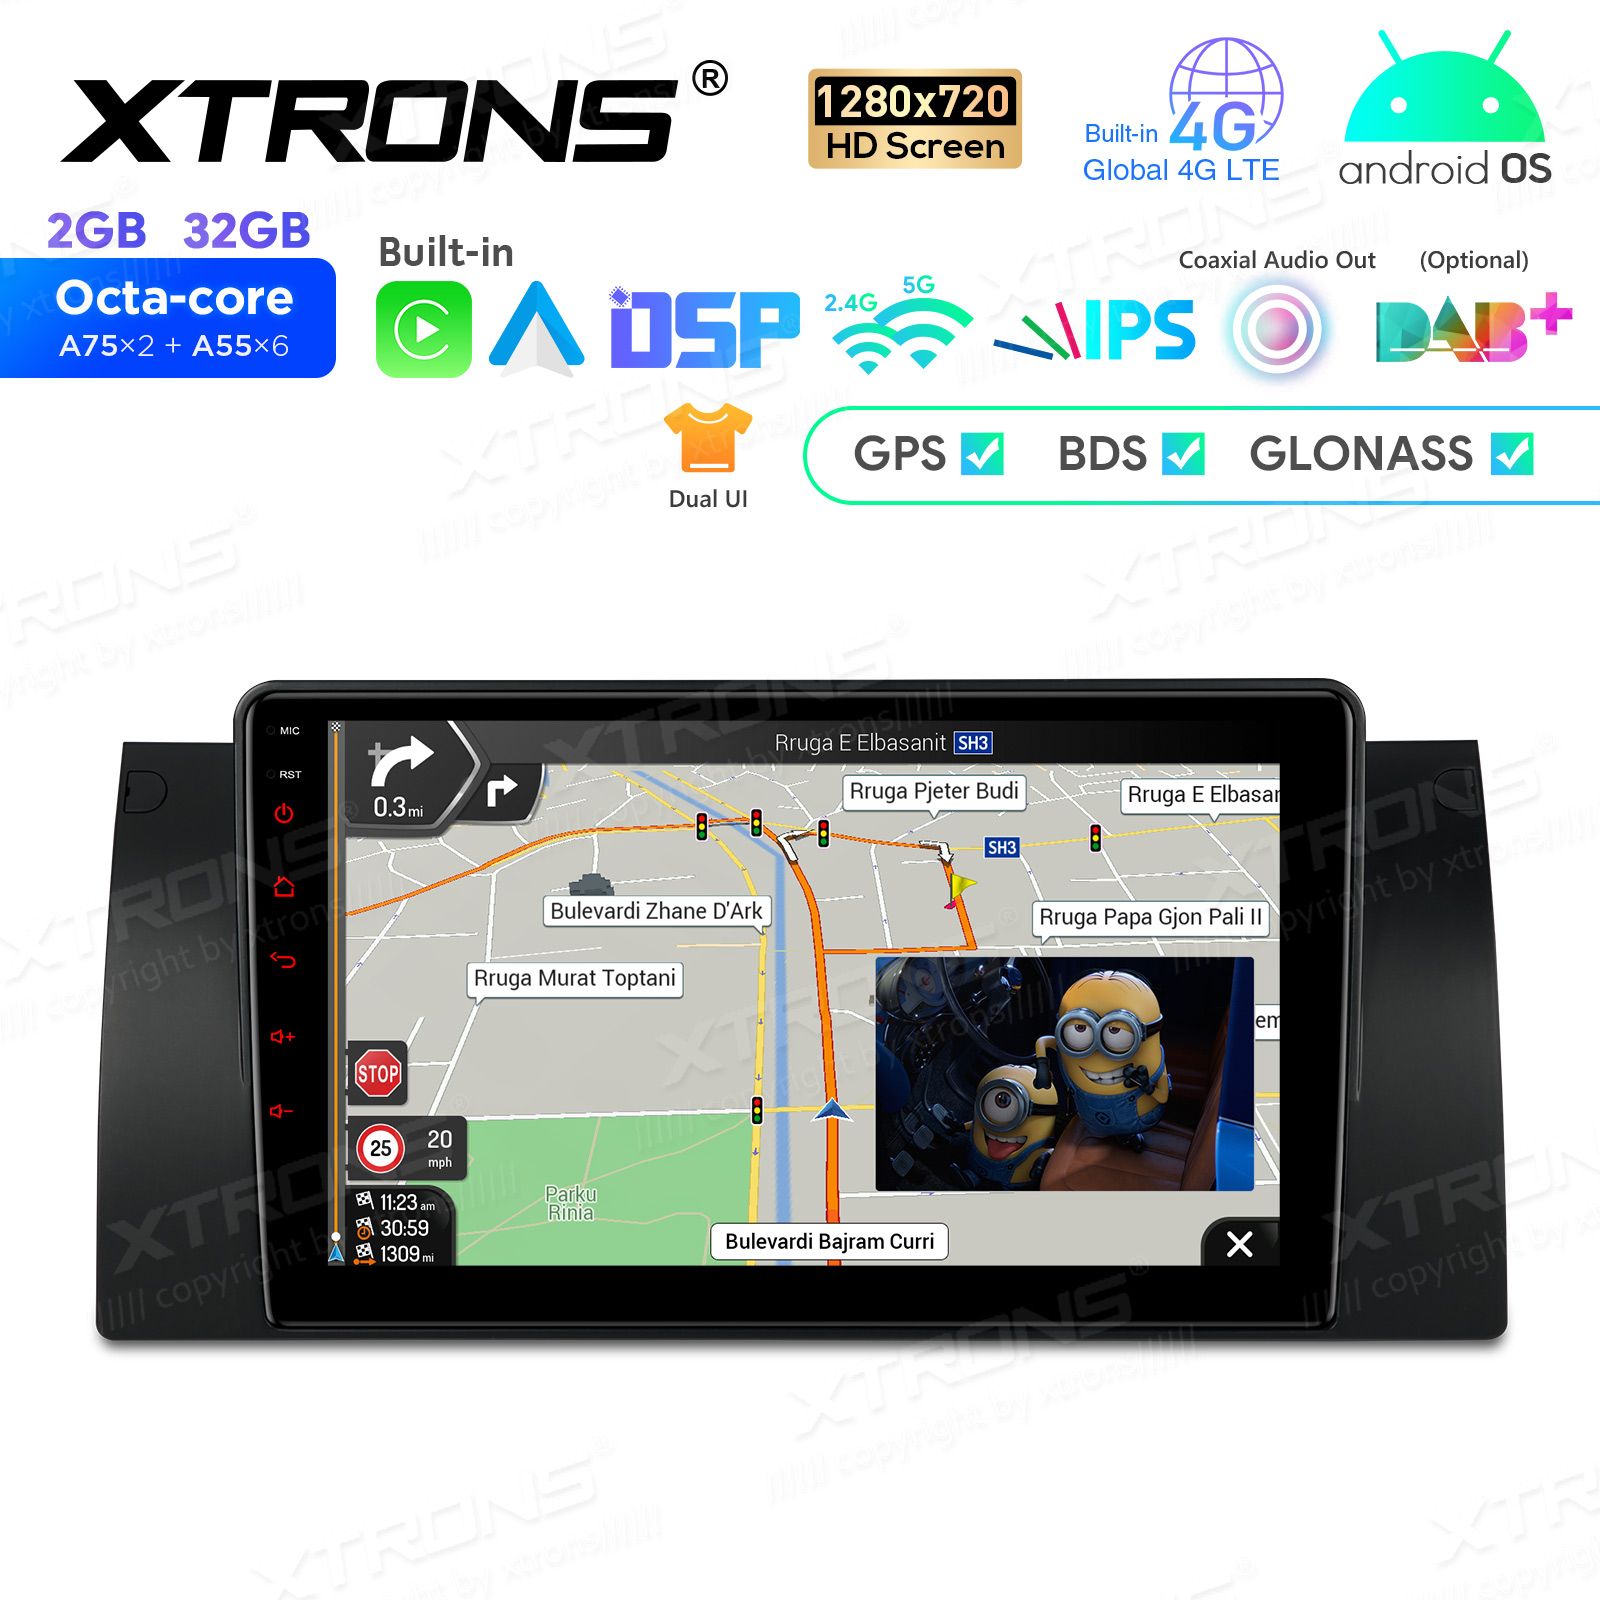 BMW X5 E53 (1999-2006) Android 12  | GPS car radio and multimedia system